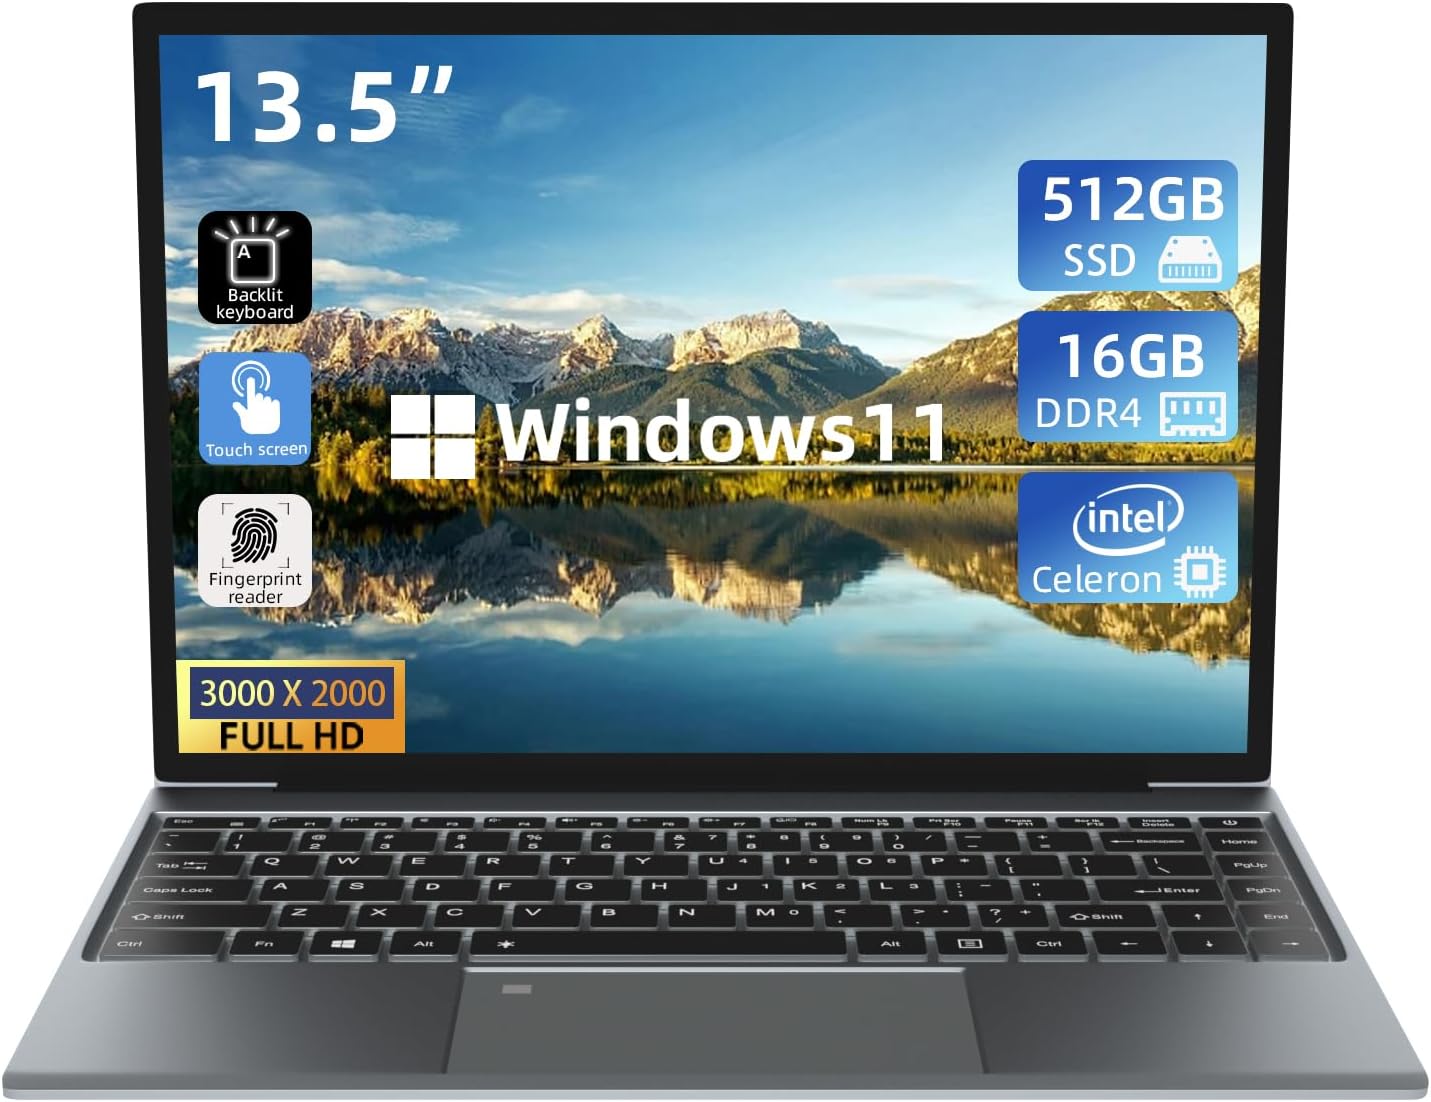 Morostron 13.5 Touch Screen Laptop, Windows 11 Laptop Computer with Intel N5095, 16GB RAM 512GB SSD, 3000x2000 FHD, Backlit Keyboard, Touch ID, WIFI, USB3.0*2, Bluetooth 4.2, HDMI, 38WH Battery, Gray